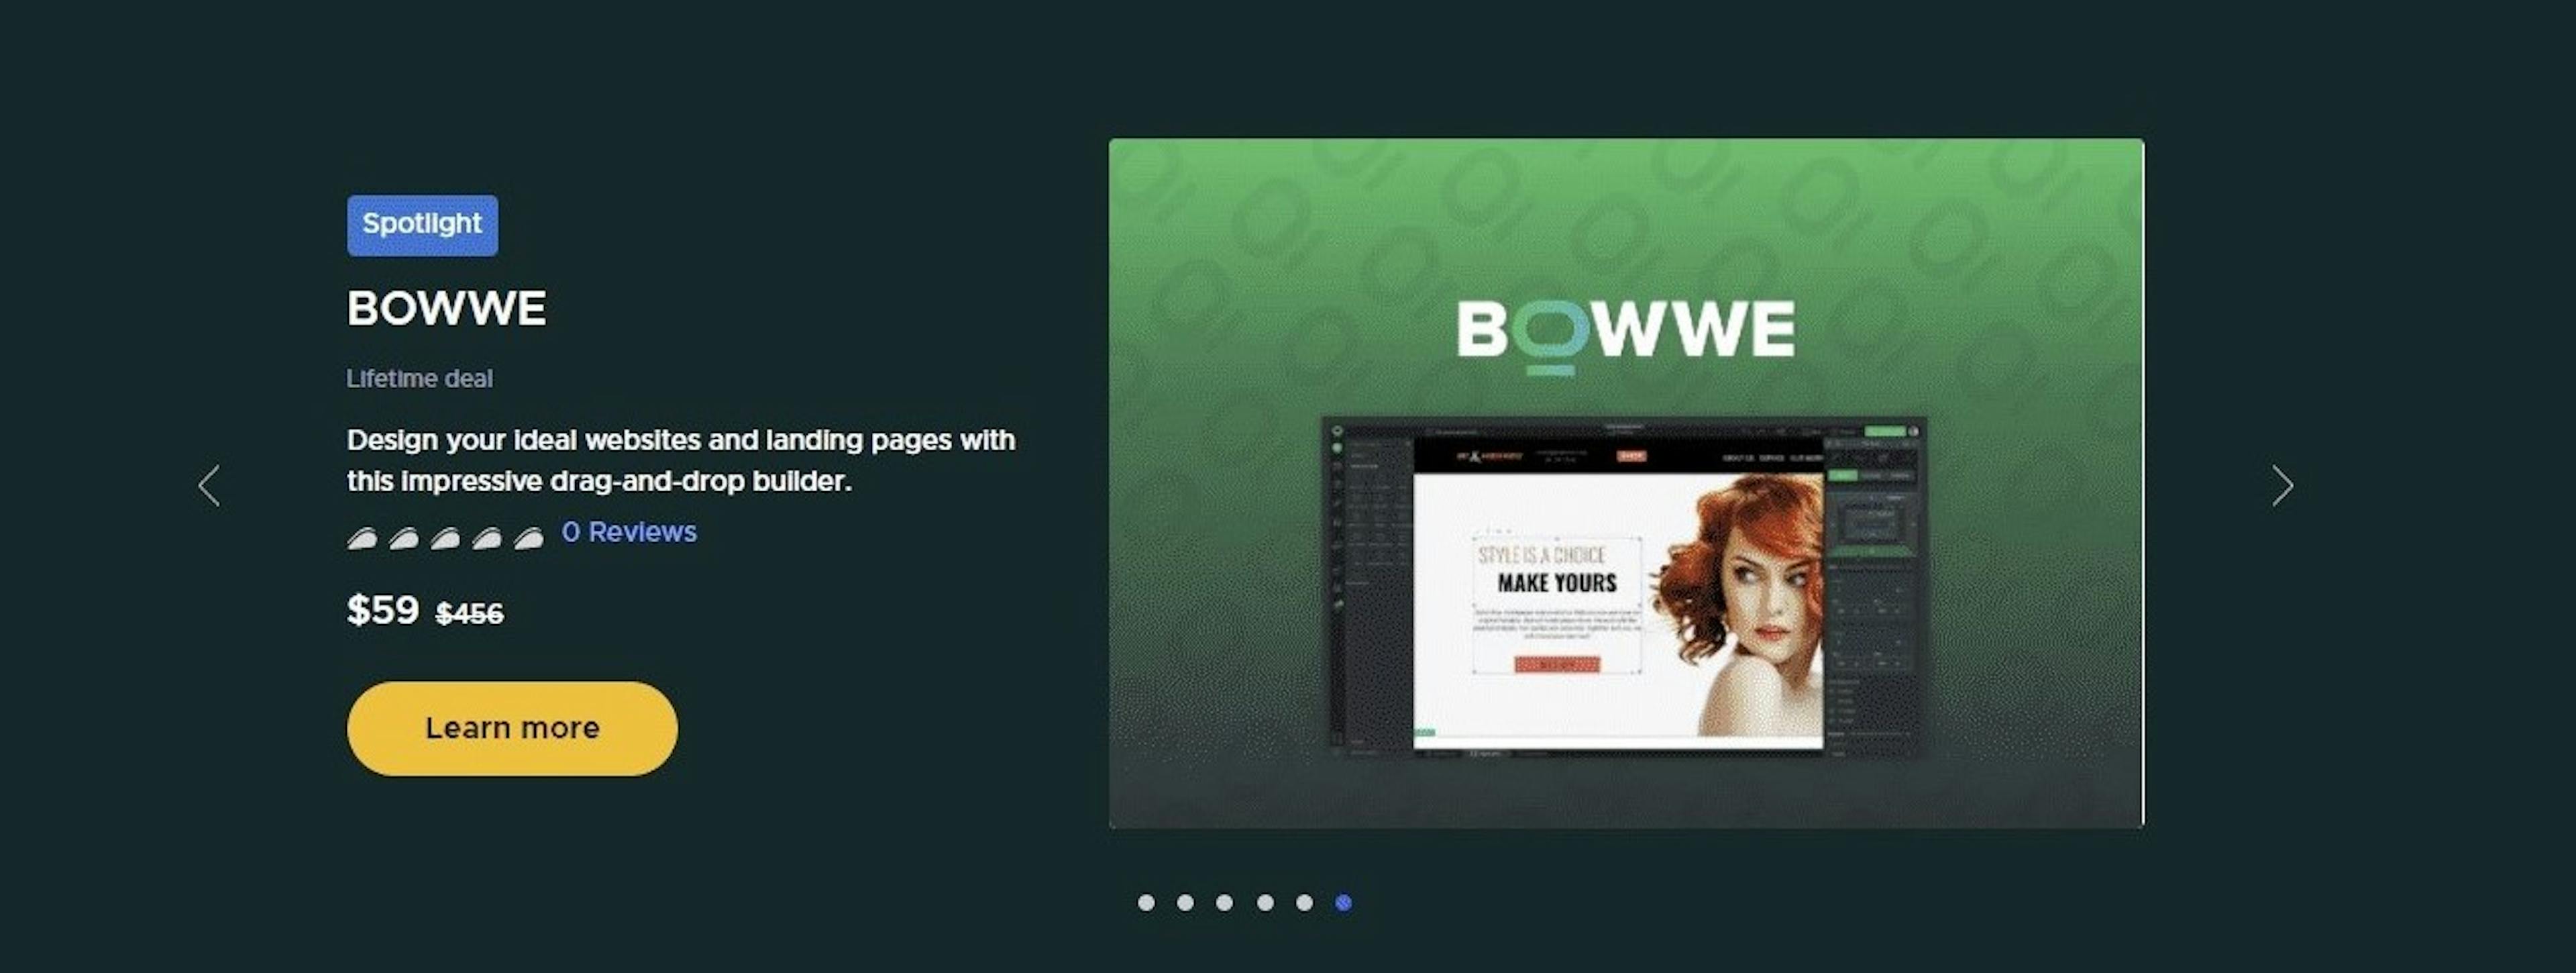 BOWWE on the banner on AppSumo homepage